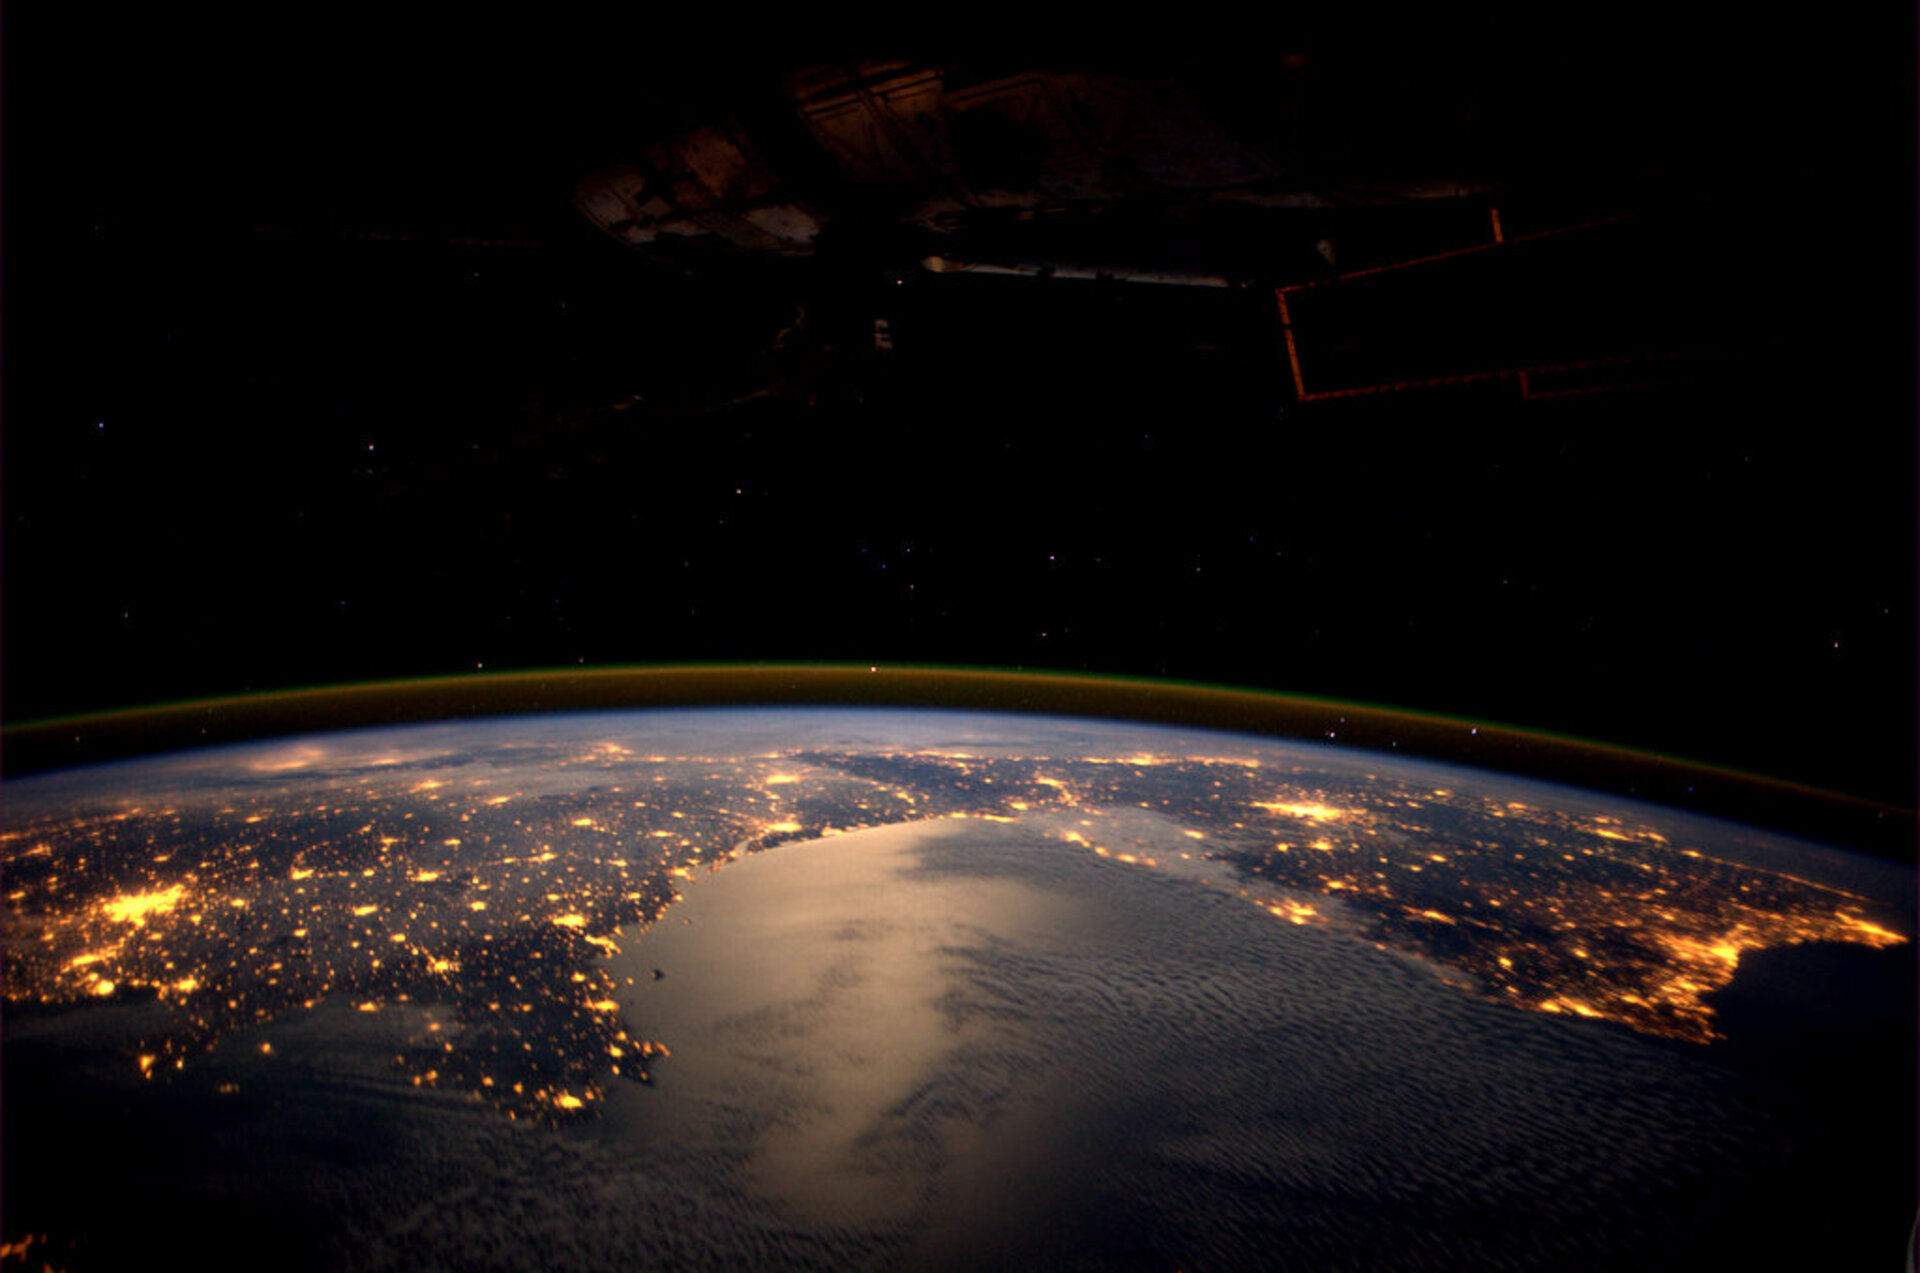 Europe seen by André Kuipers onboard the ISS